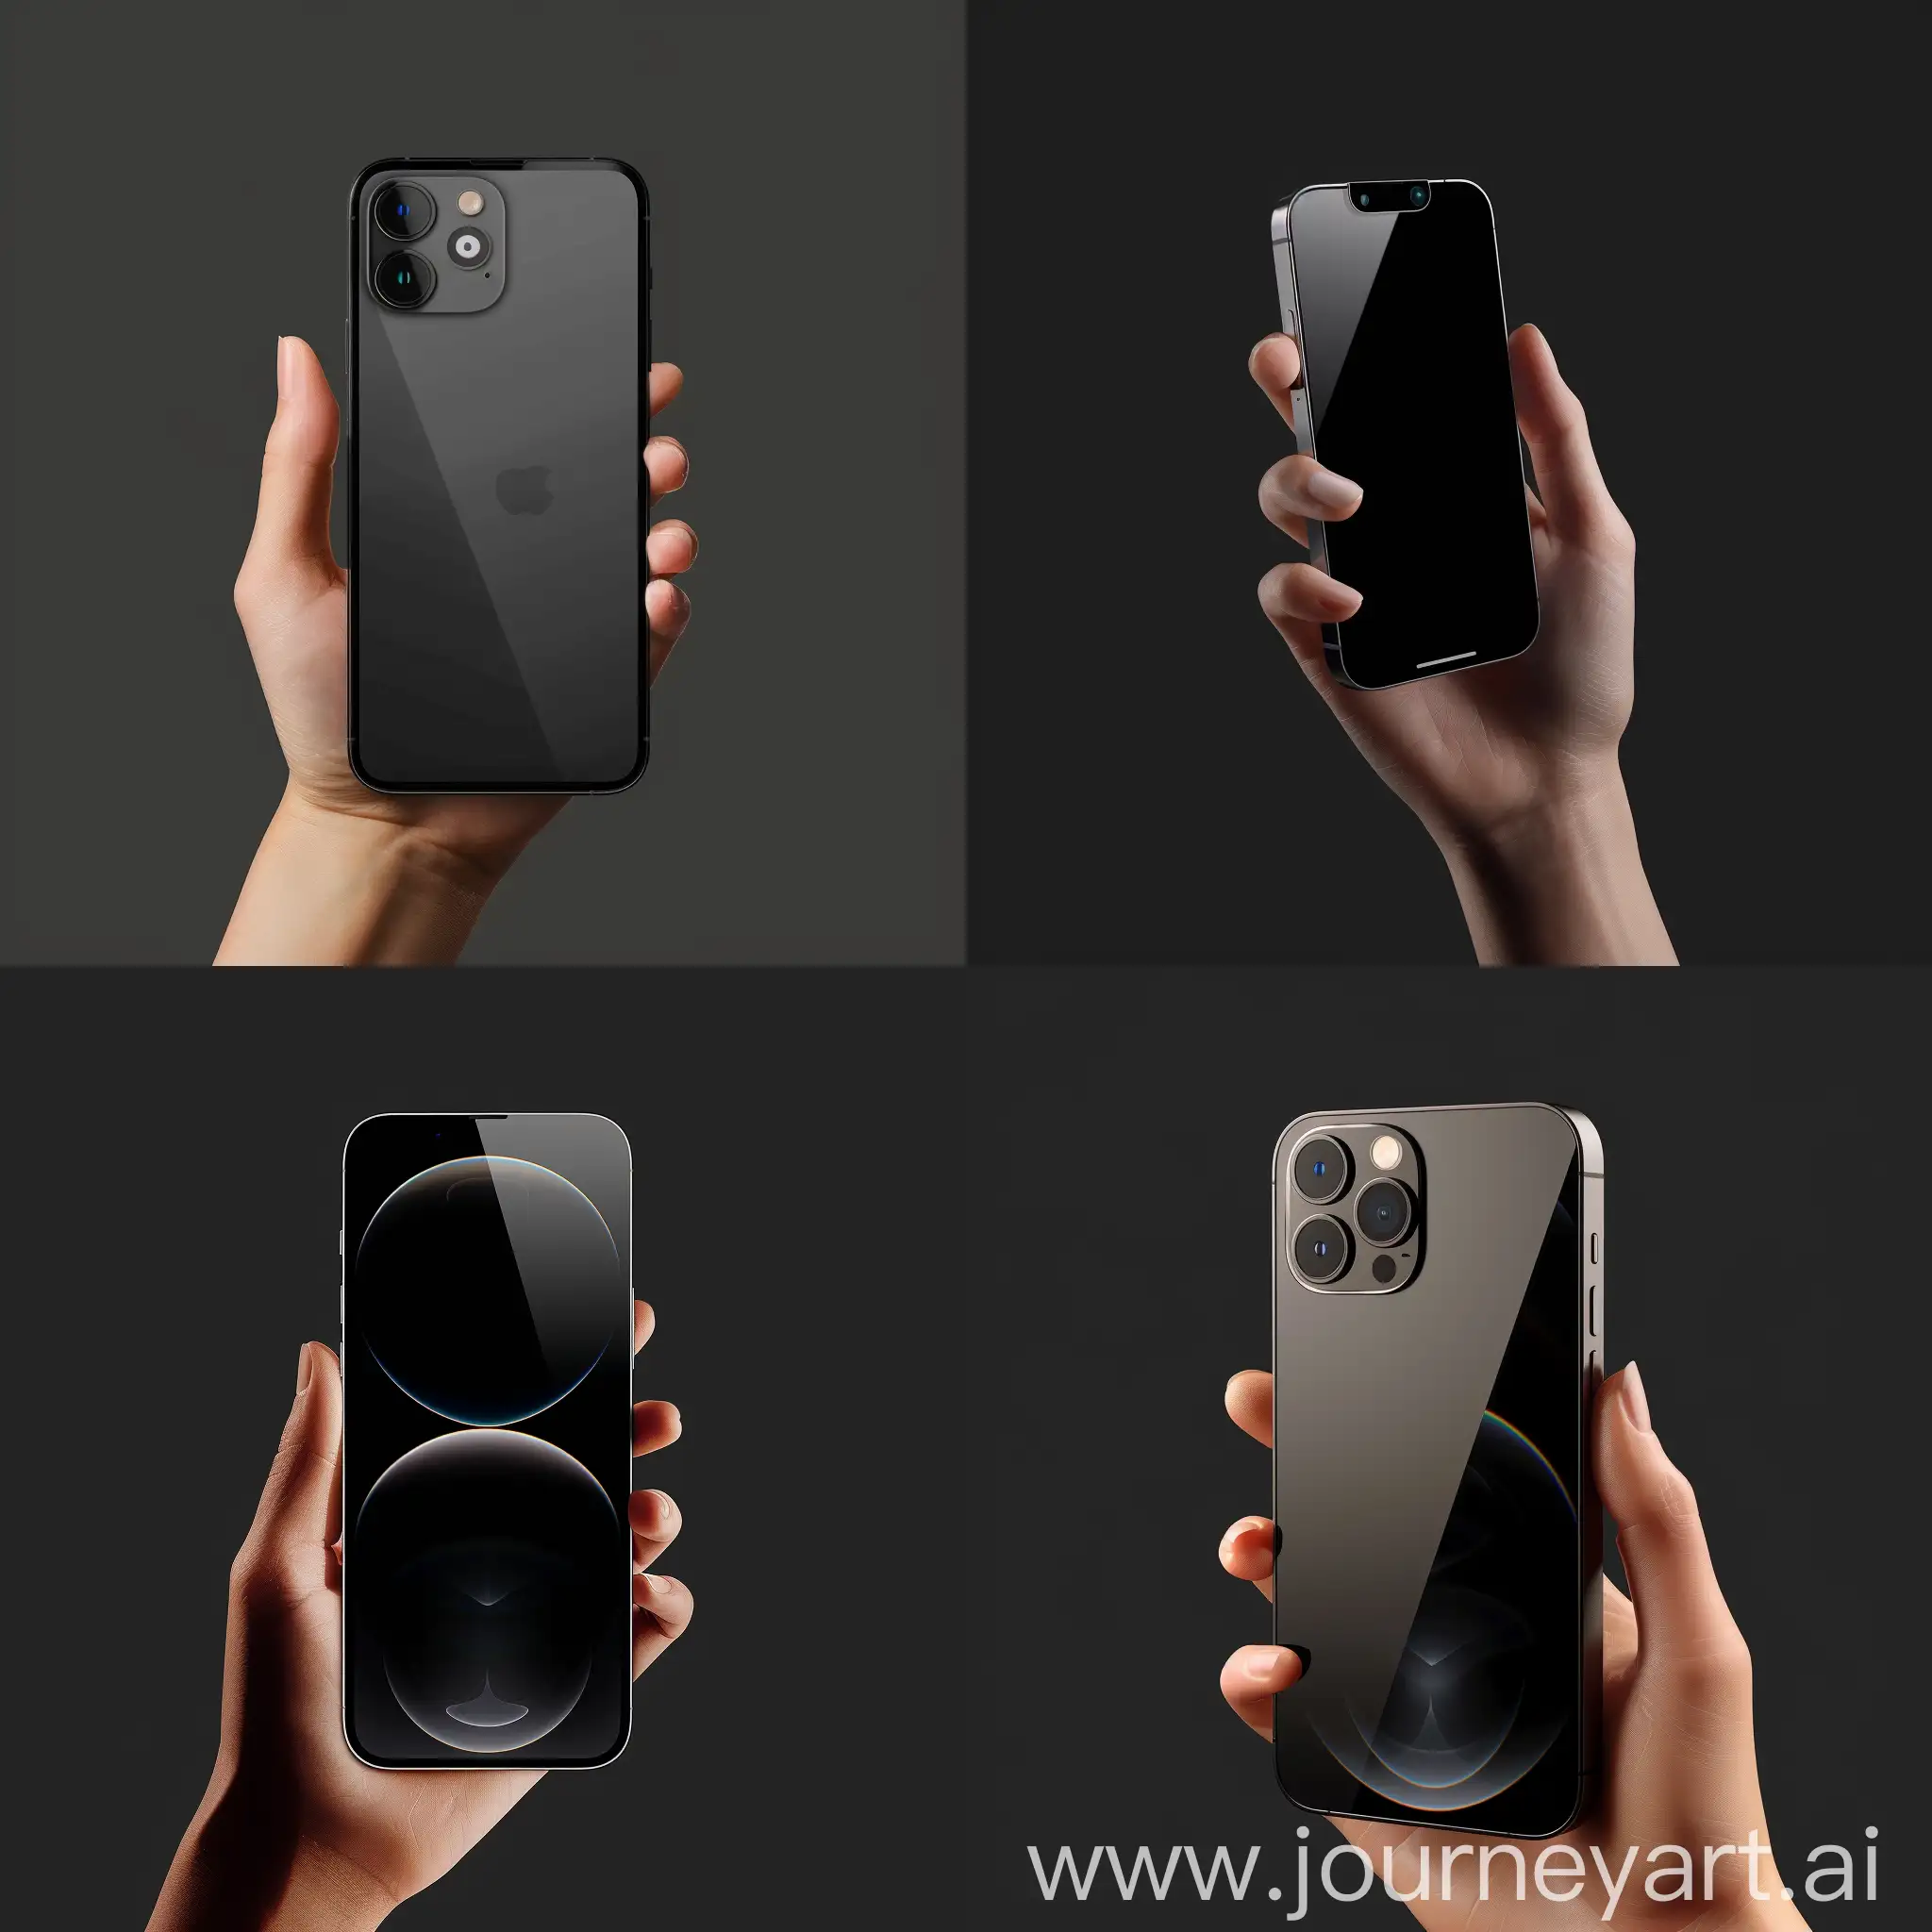 Modern-Mockup-Iphone-15-Pro-Held-in-Hand-on-Black-Background